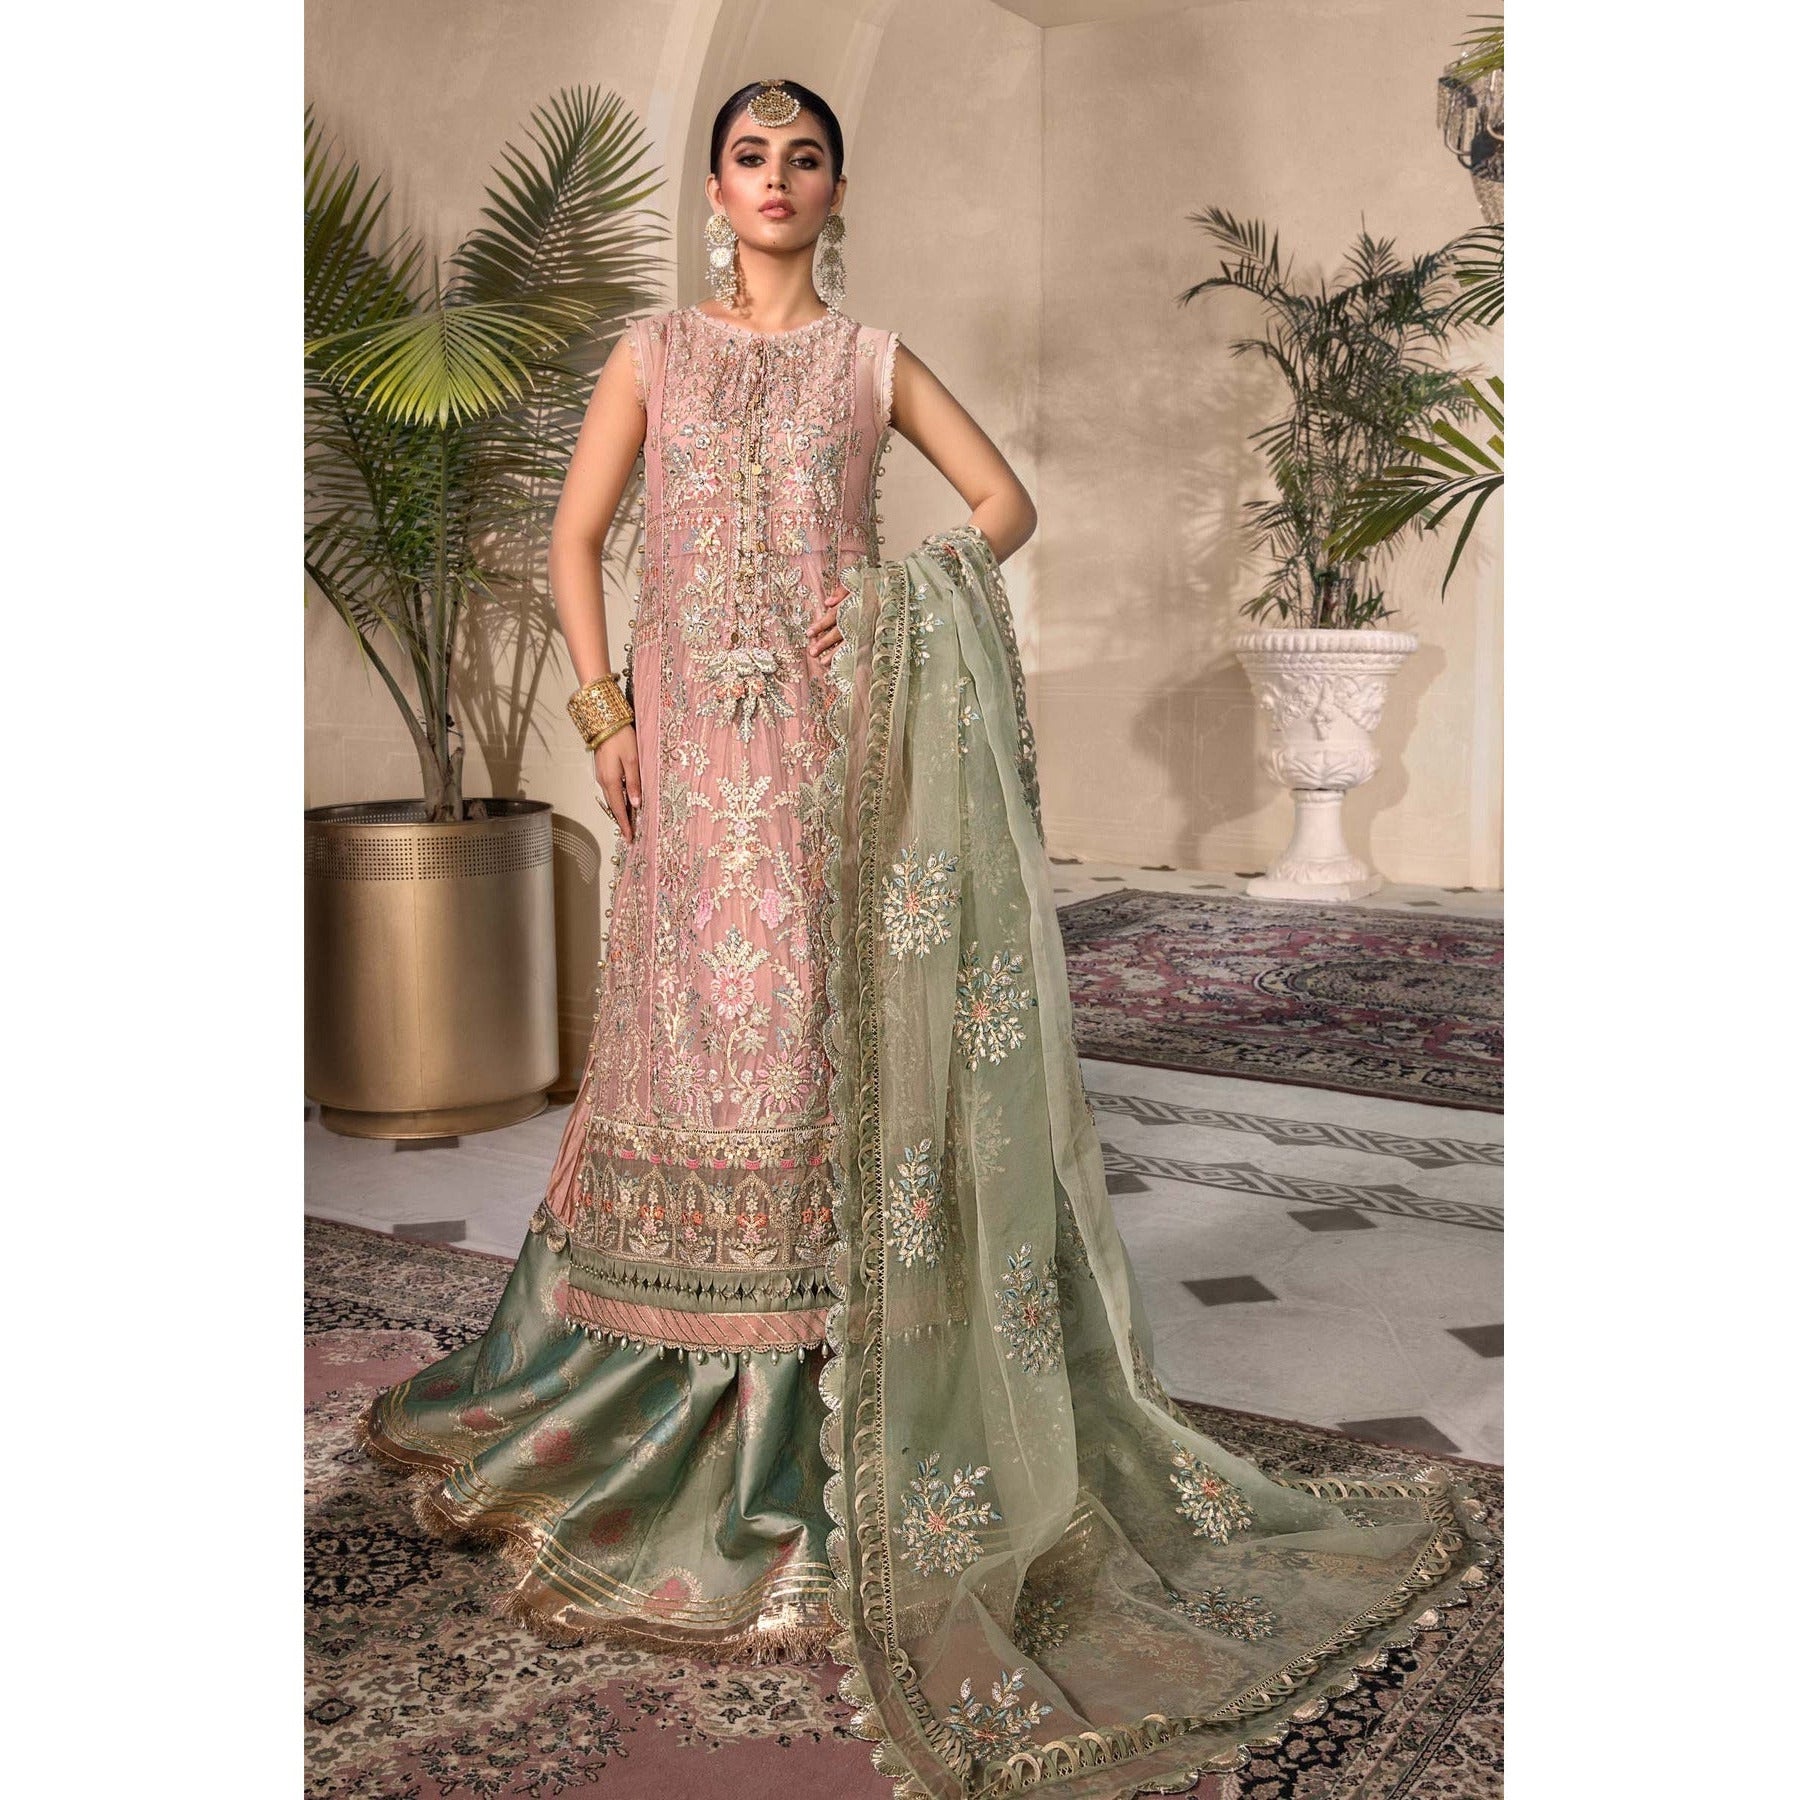 Maria.B. | Mbroidered Heritage Edition '23 | BD-2607 - House of Faiza